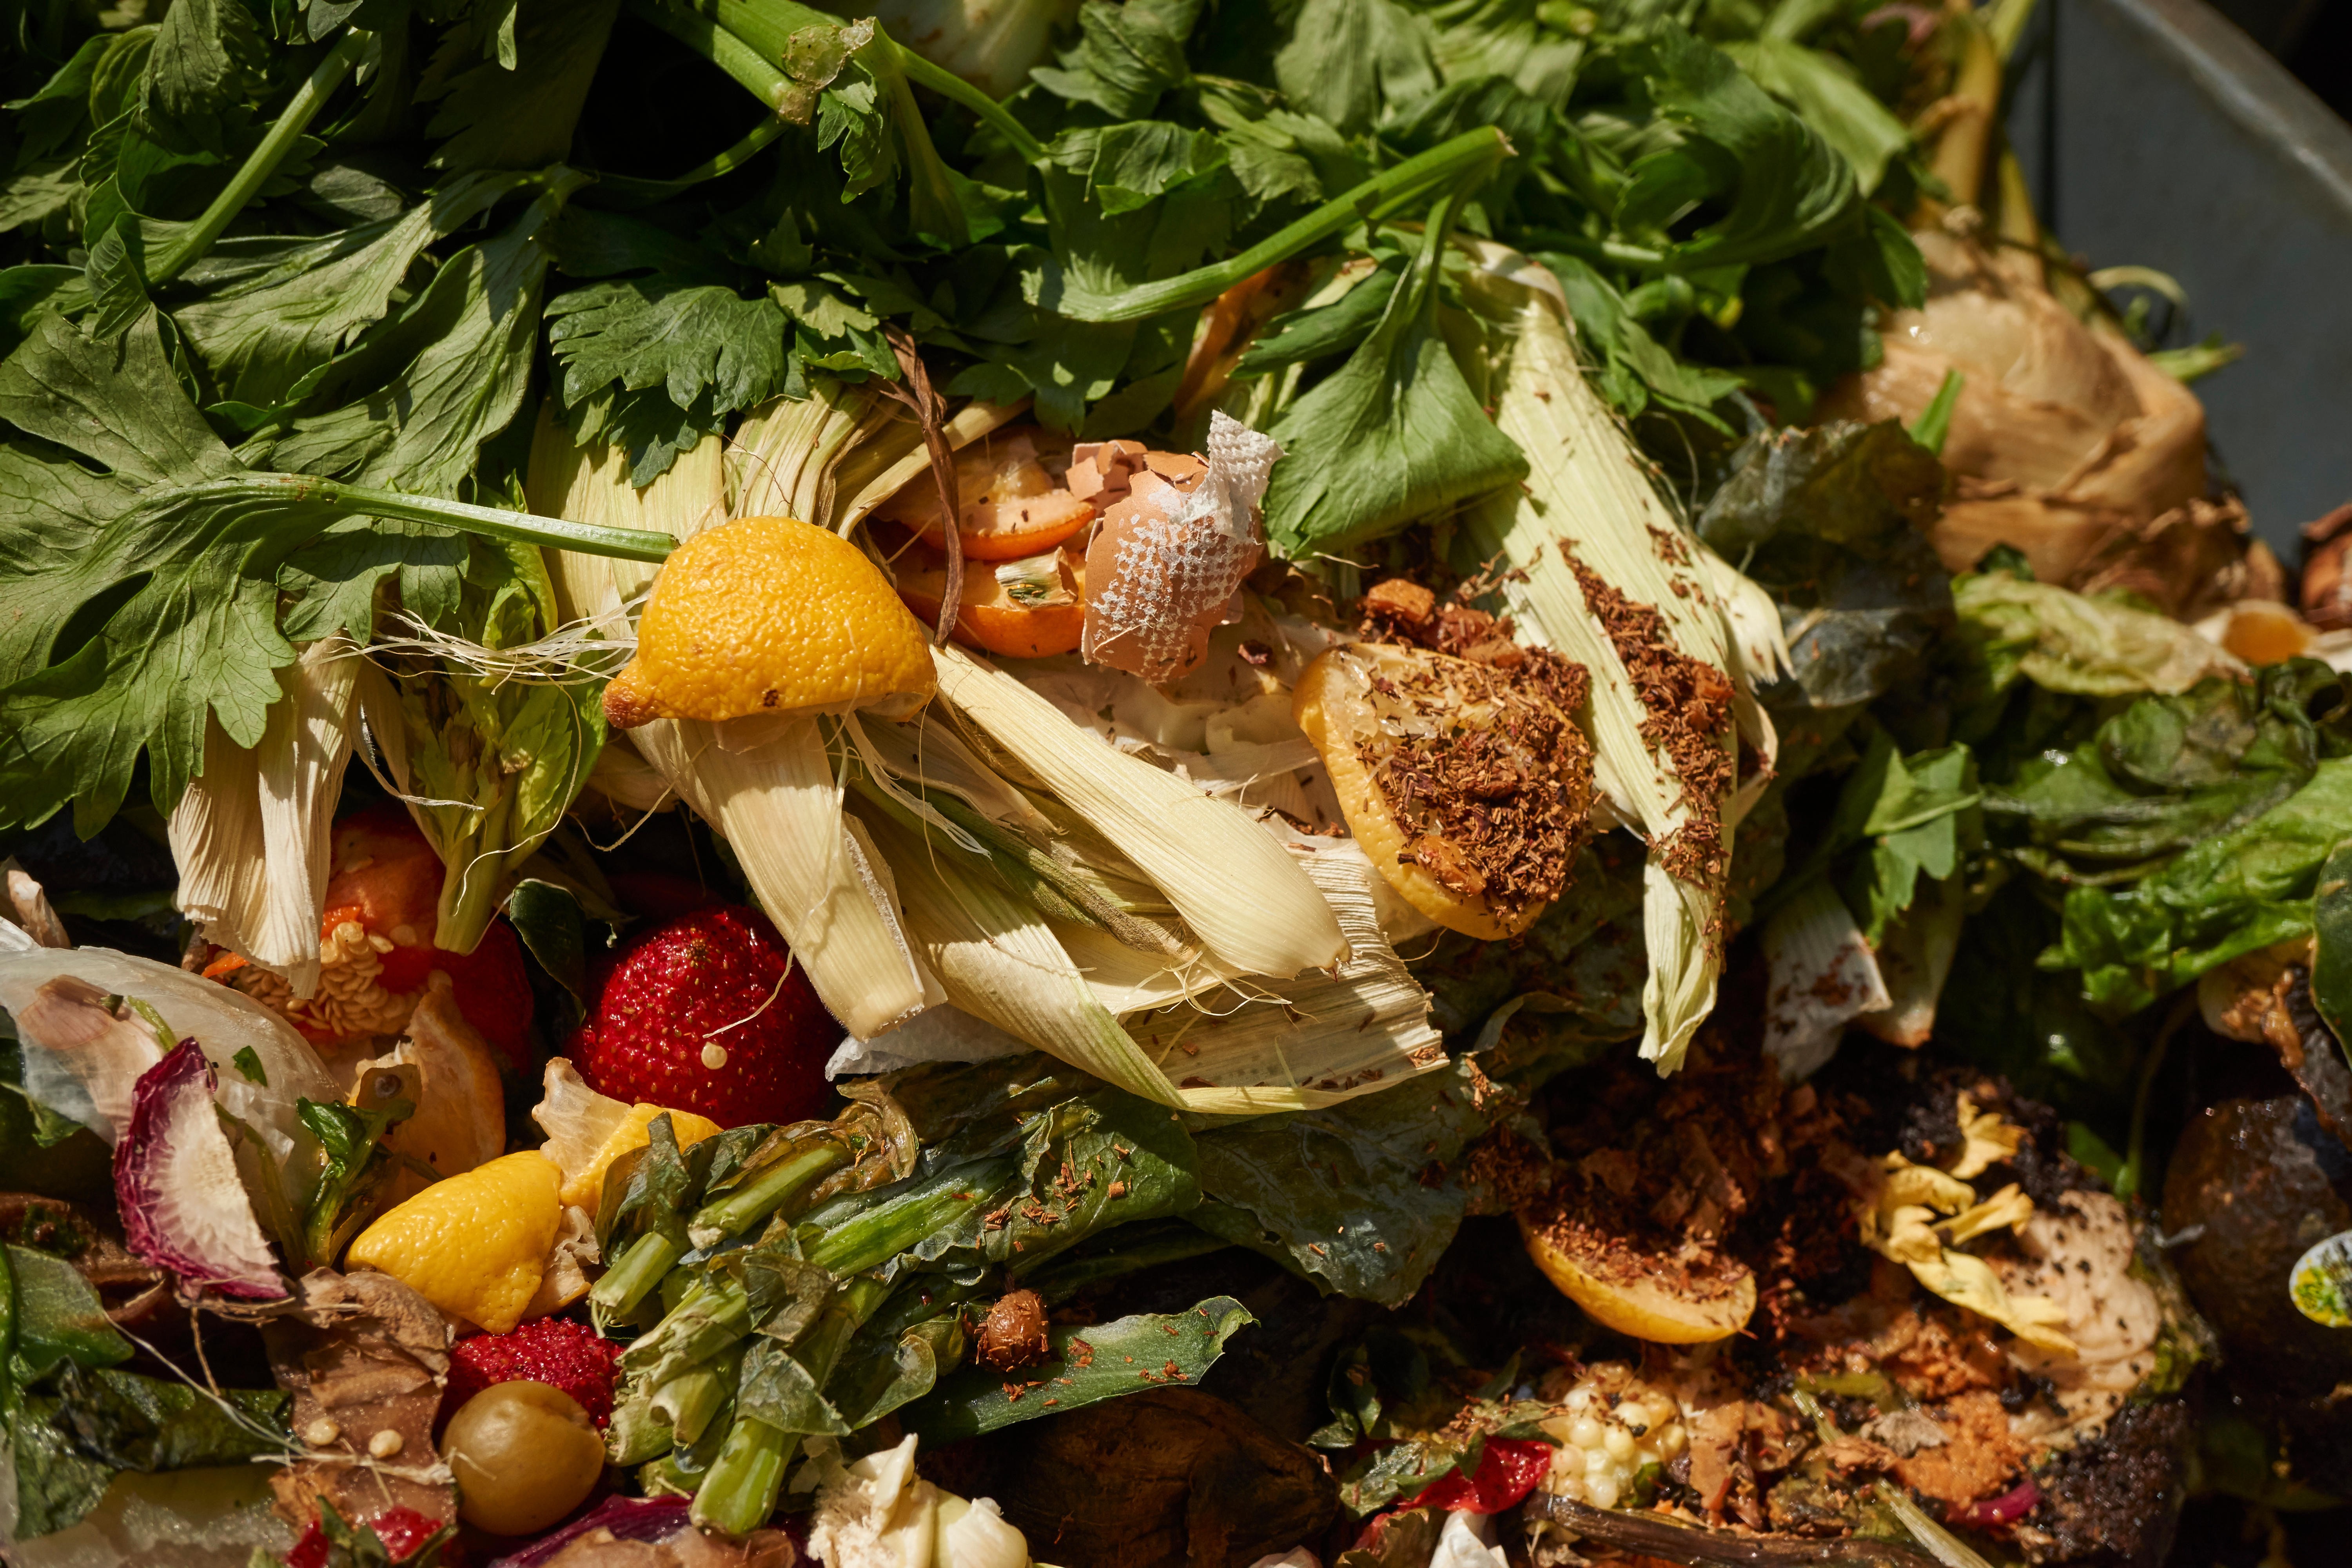 There are many ways to cut down on your food waste. Photo: Alamy